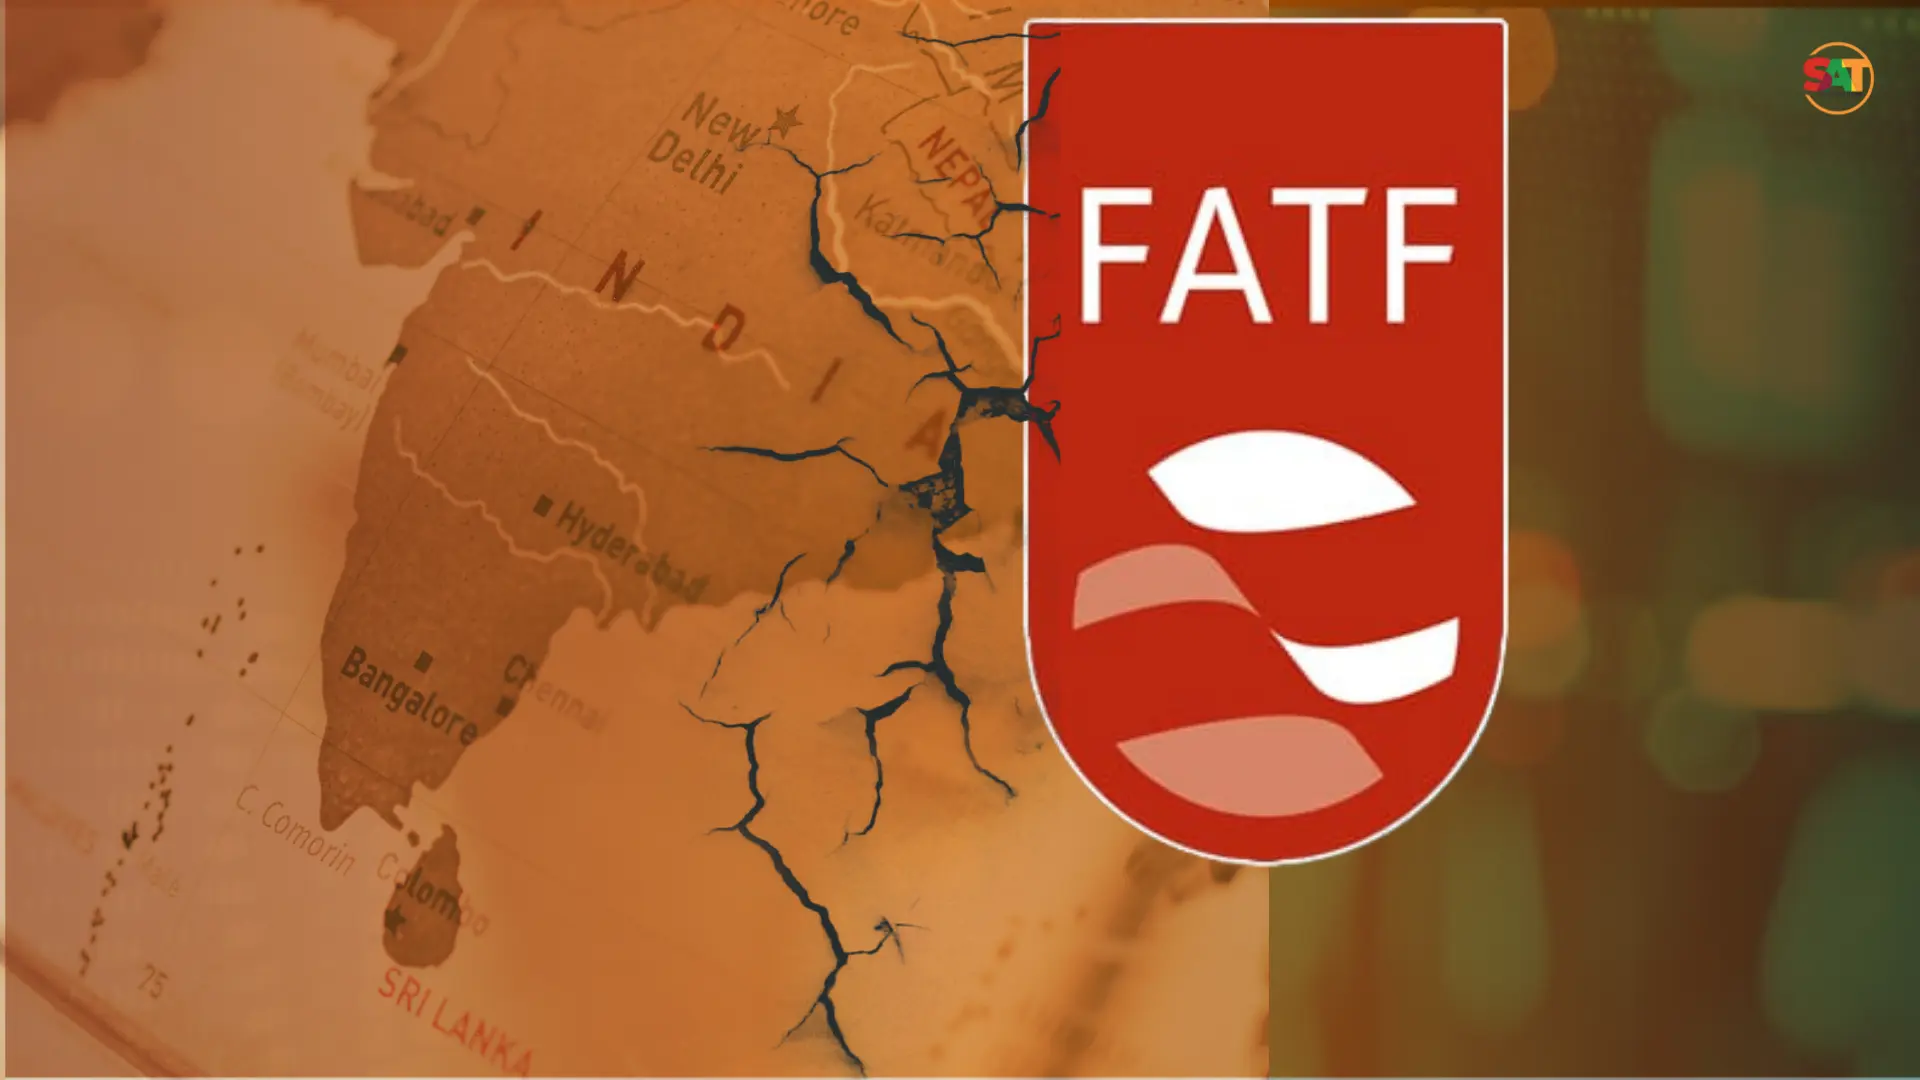 On FATF and India